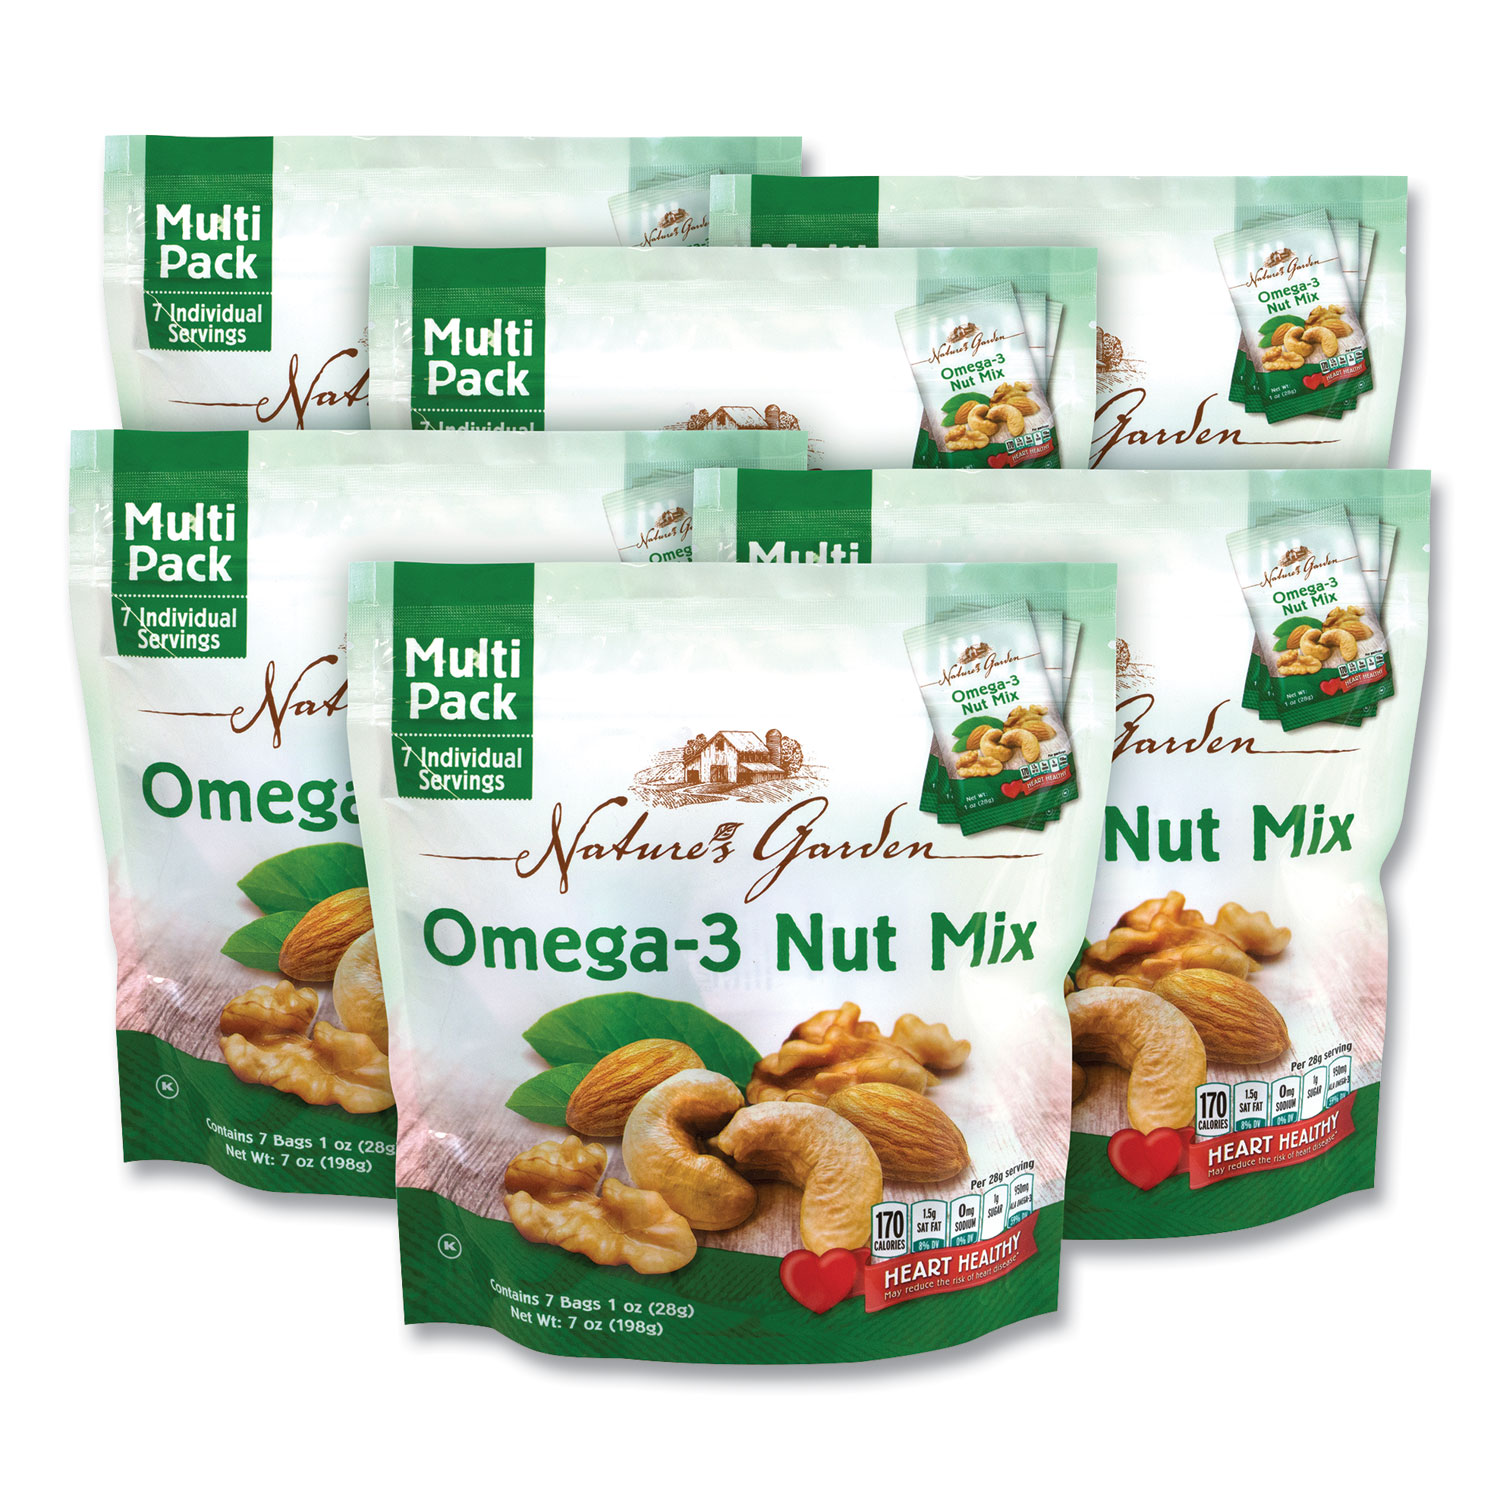  Nature's Garden 7028 Omega-3 Nut Mix, 1 oz Pouch, 7 Pouches/Pack, 6 Packs/Box, Free Delivery in 1-4 Business Days (GRR29400007) 